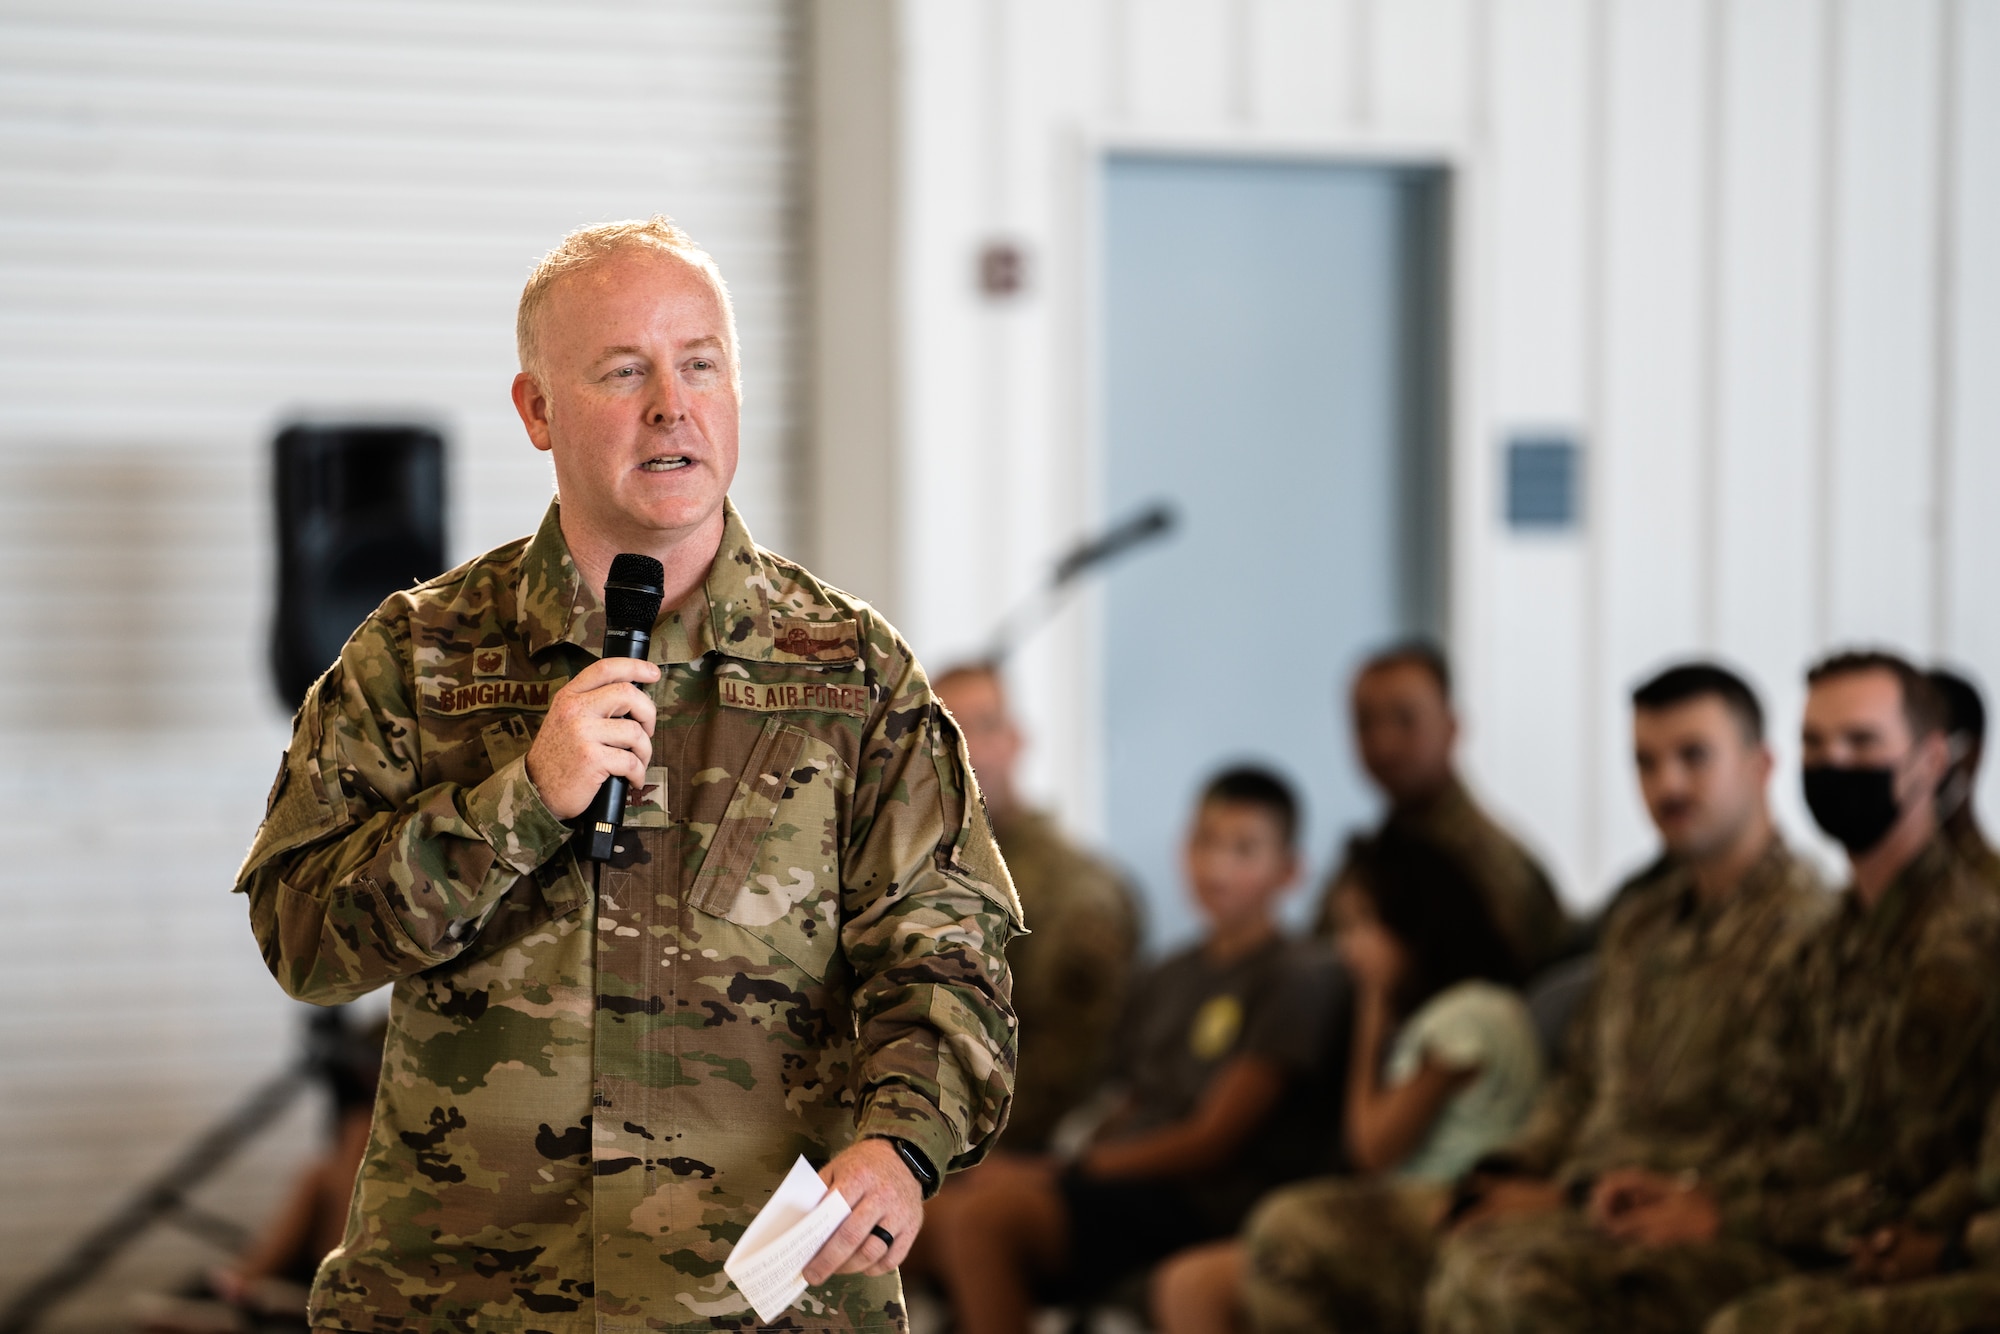 U.S. Air Force Col. Adam Bingham, 6th Air Refueling Wing commander, delivers opening remarks at a wing all-call at MacDill Air Force Base, Florida, Aug. 4, 2022.